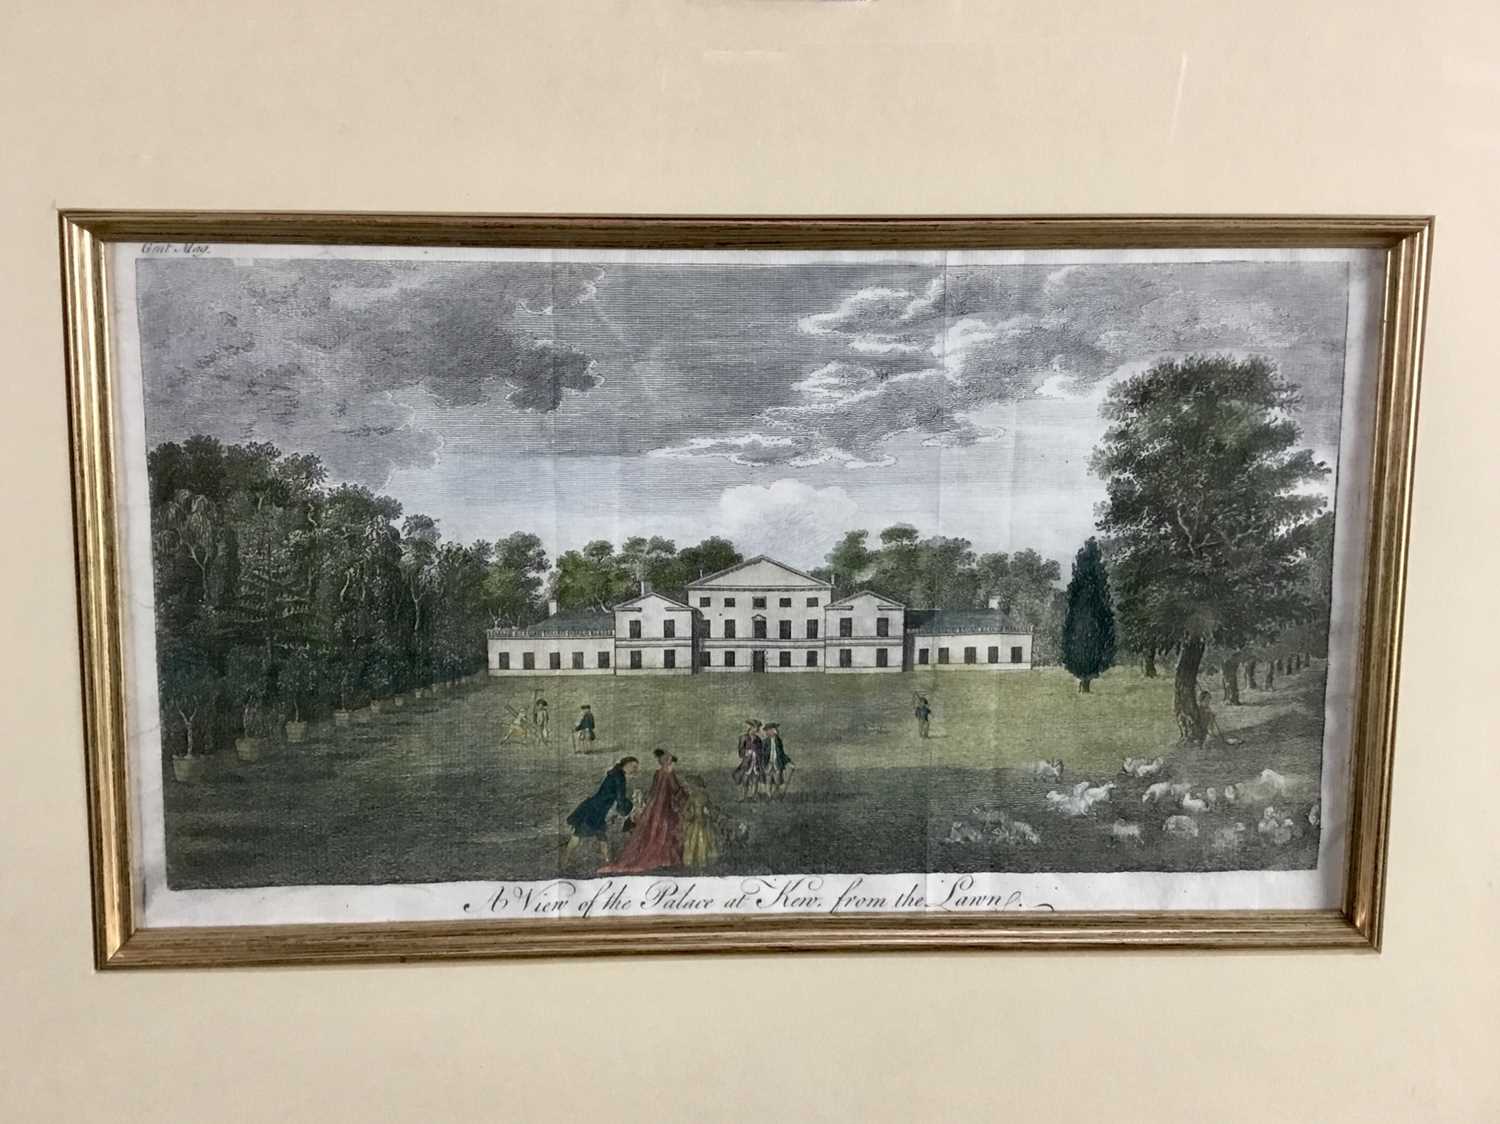 Georgian hand colored engraving, "A view of the Palace at Kew", 17cm x 29cm, in glazed gilt frame